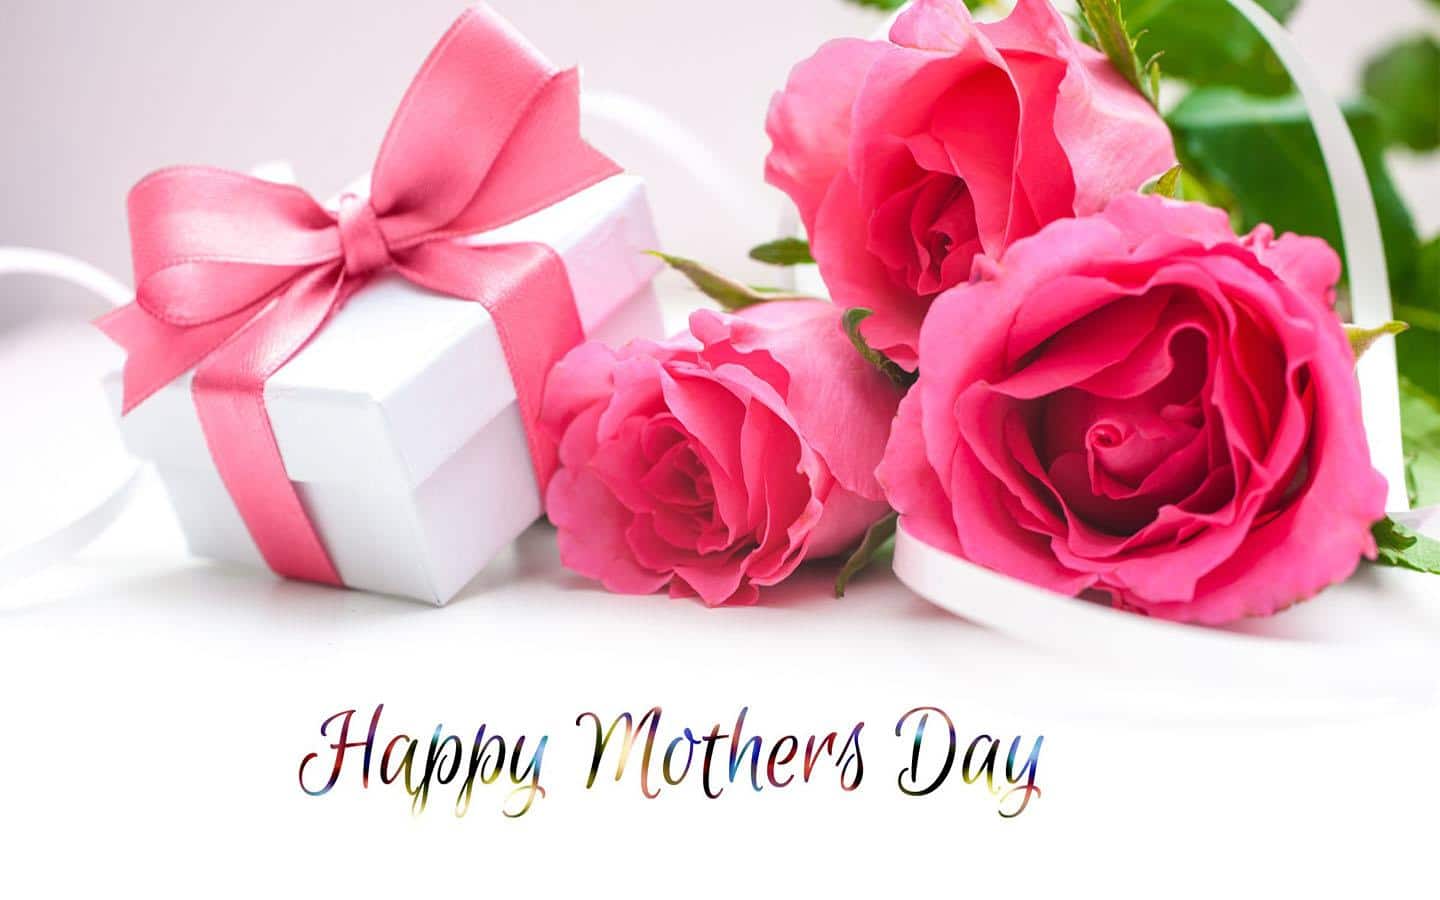 Happy Mother's Day HD Images 